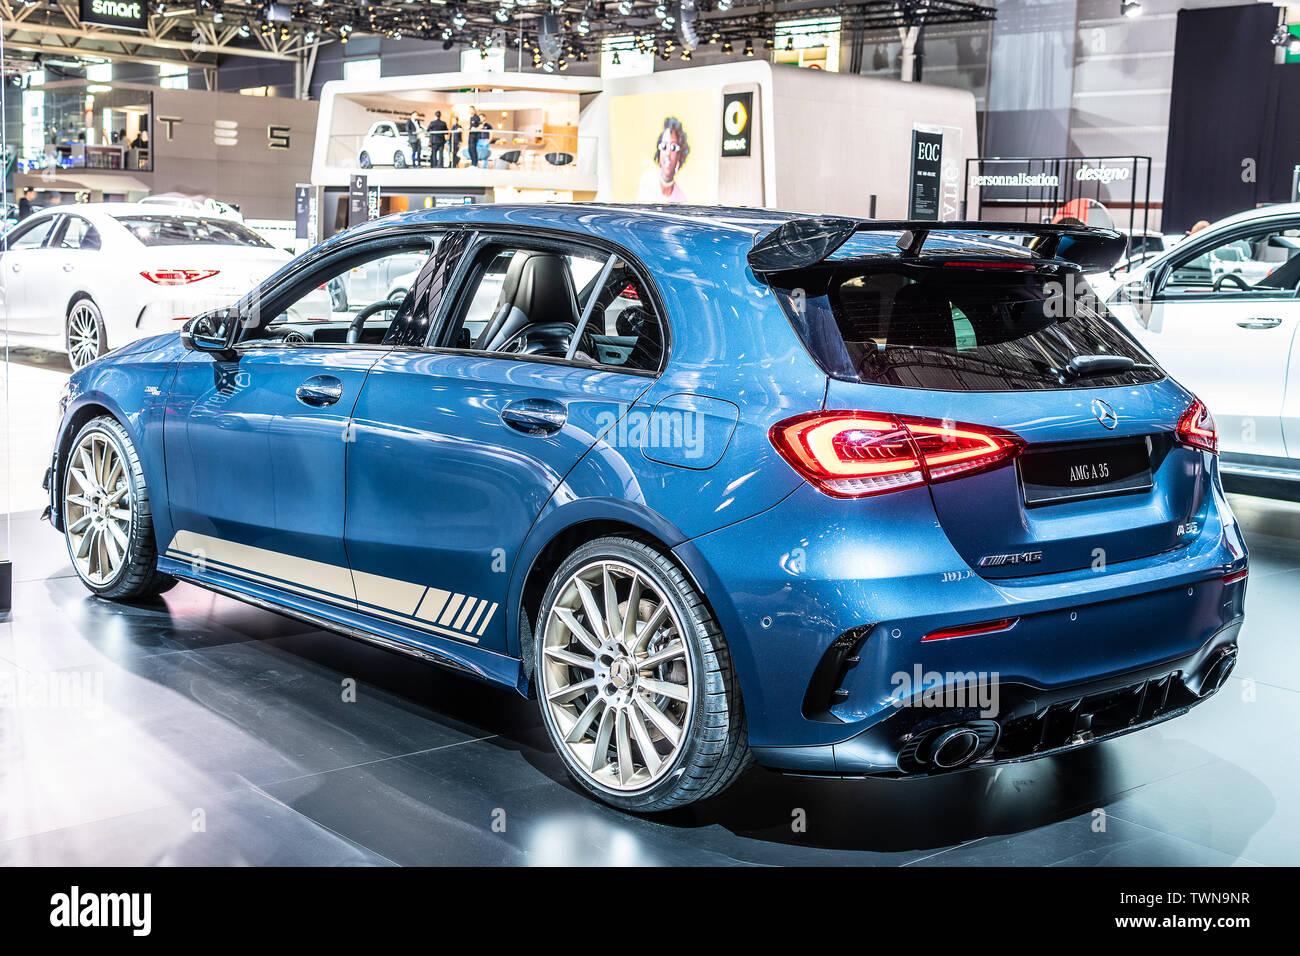 Paris France October 18 Blue Mercedes Amg A 35 4matic At Mondial Paris Motor Show 4th Gen A Class W177 Produced By Mercedes Benz Stock Photo Alamy